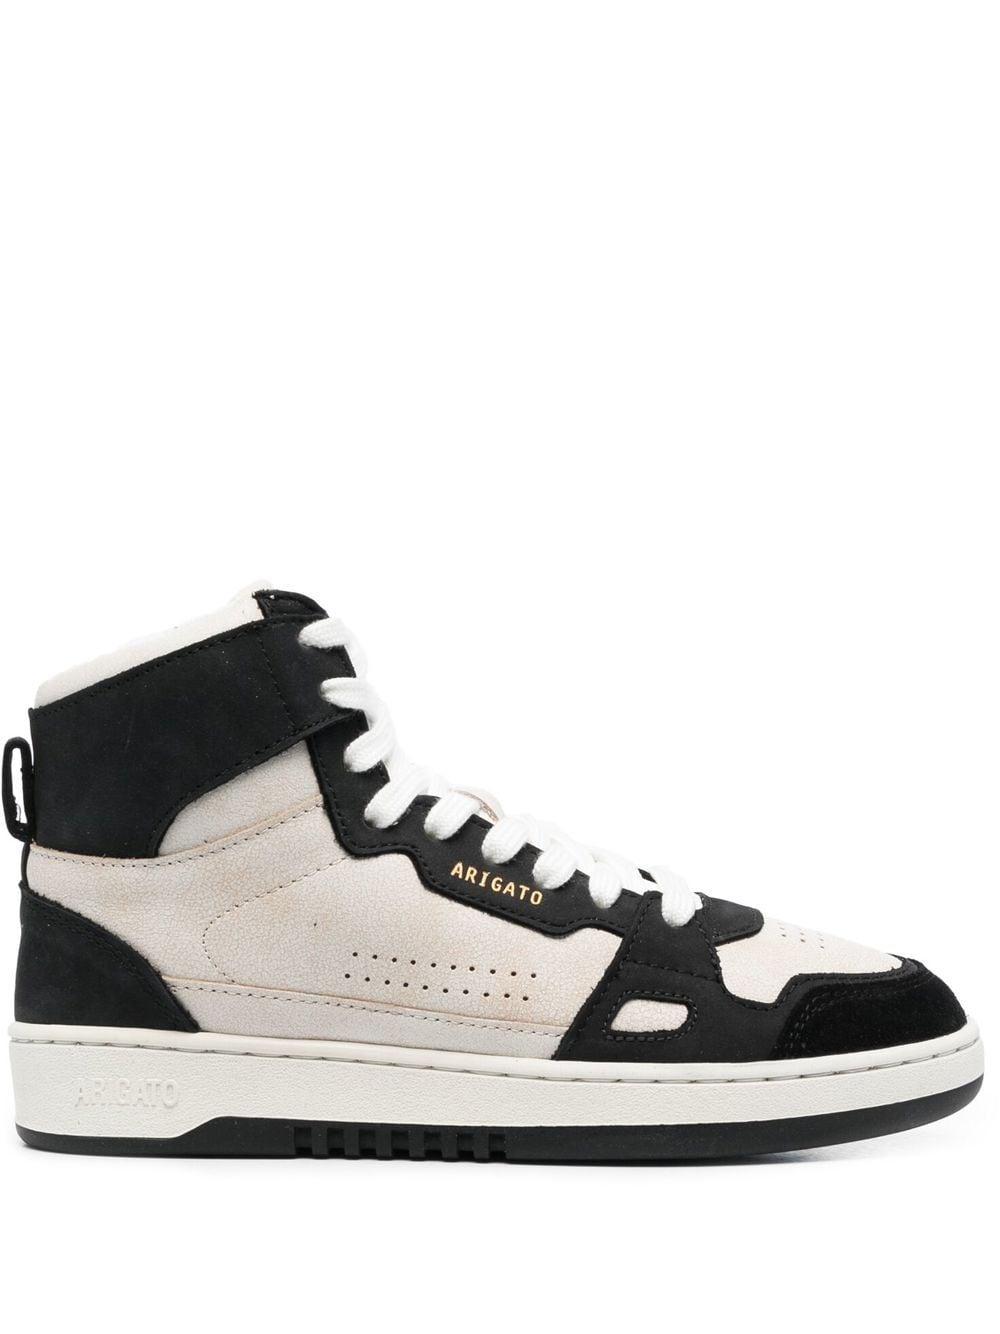 Axel Arigato Dice Hi Panelled Sneakers in Black | Lyst